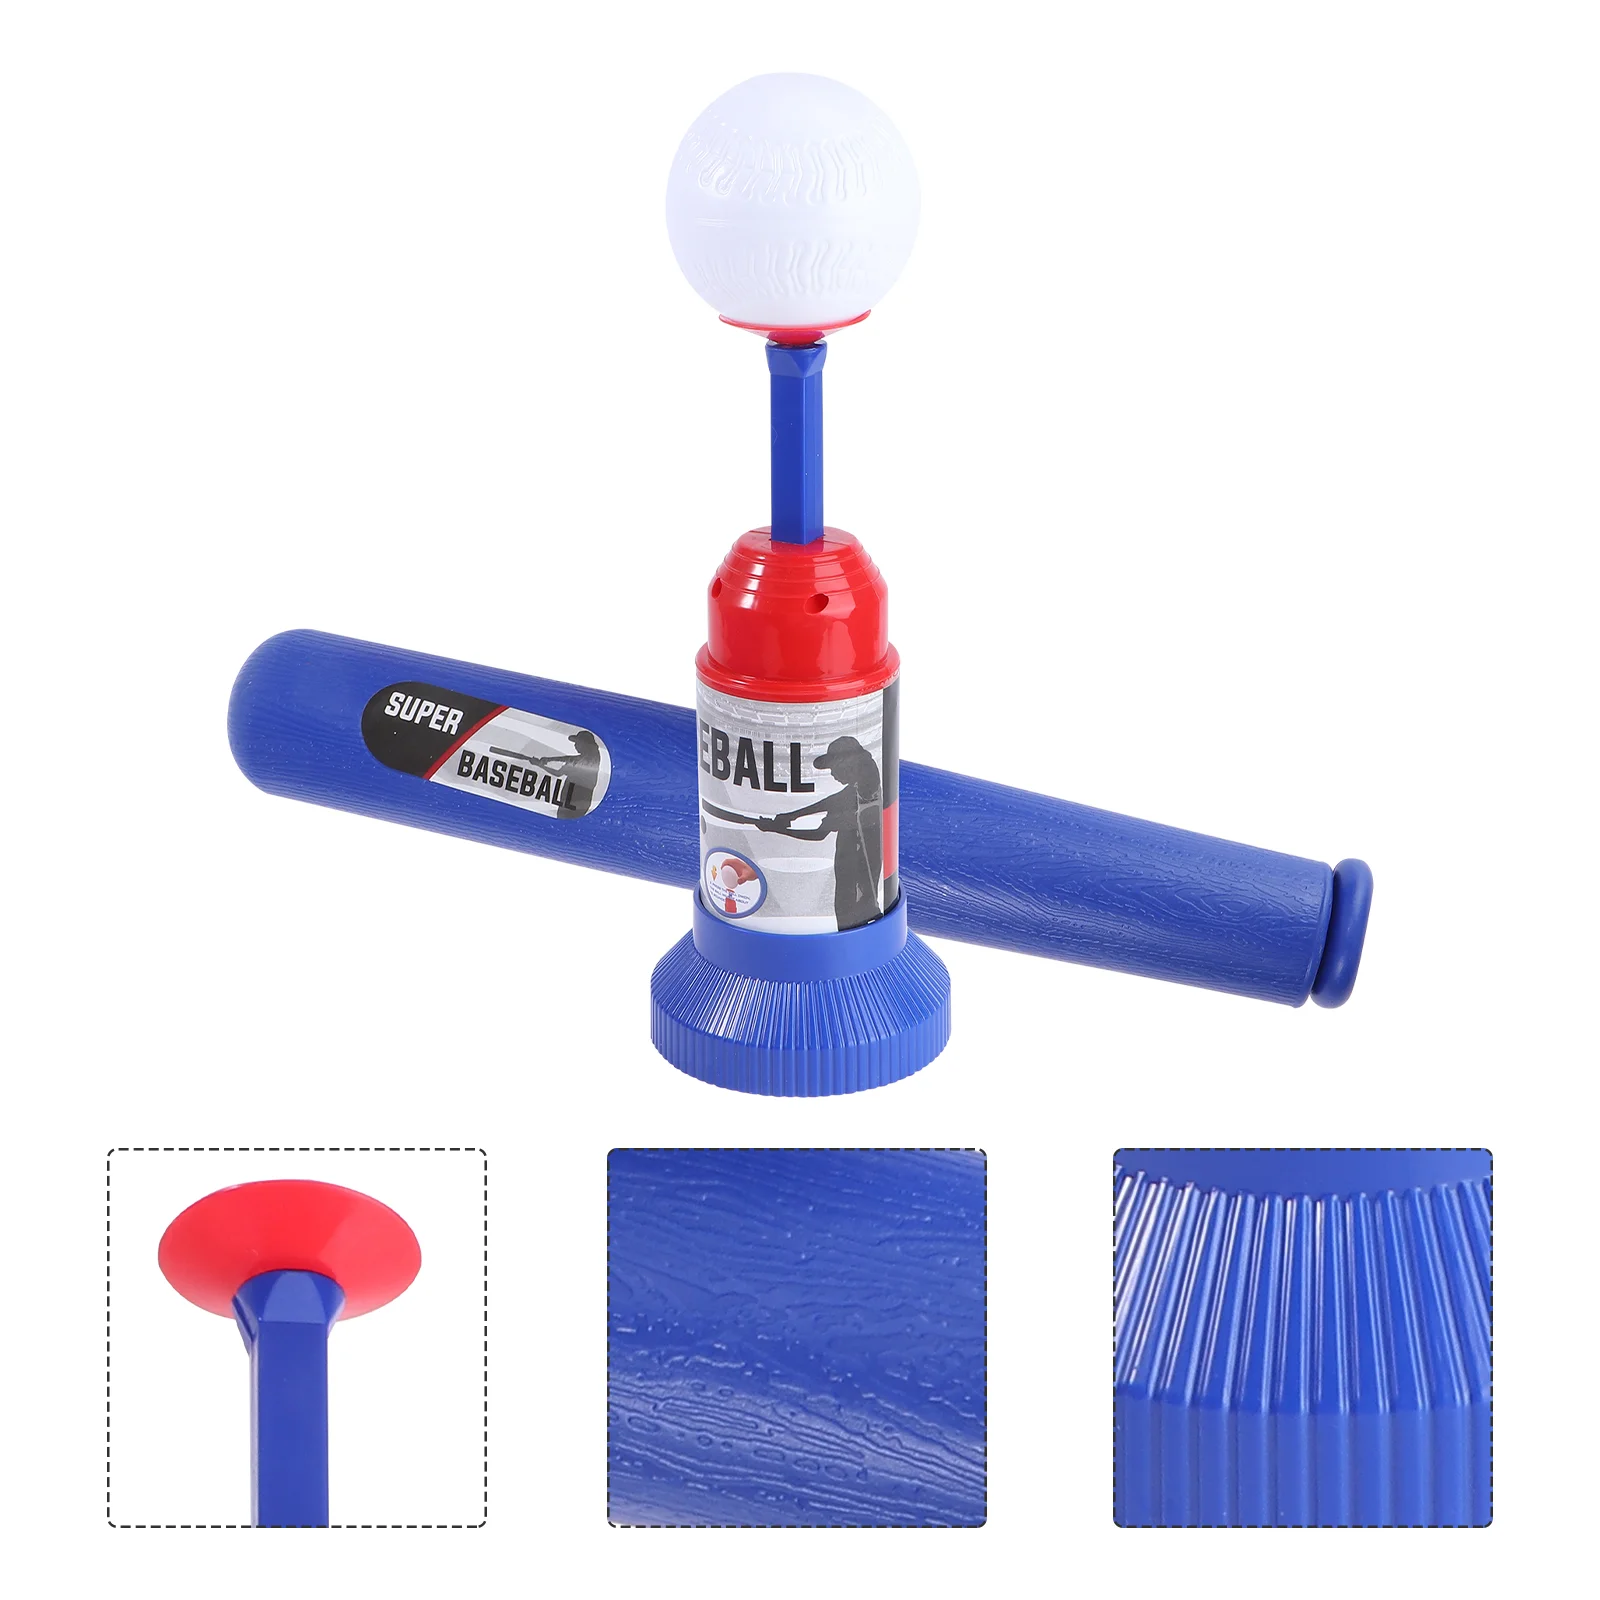 

Automatic Launcher Baseball Bat Toys Baseball Trainer Practice Toy for Toddlers Kids